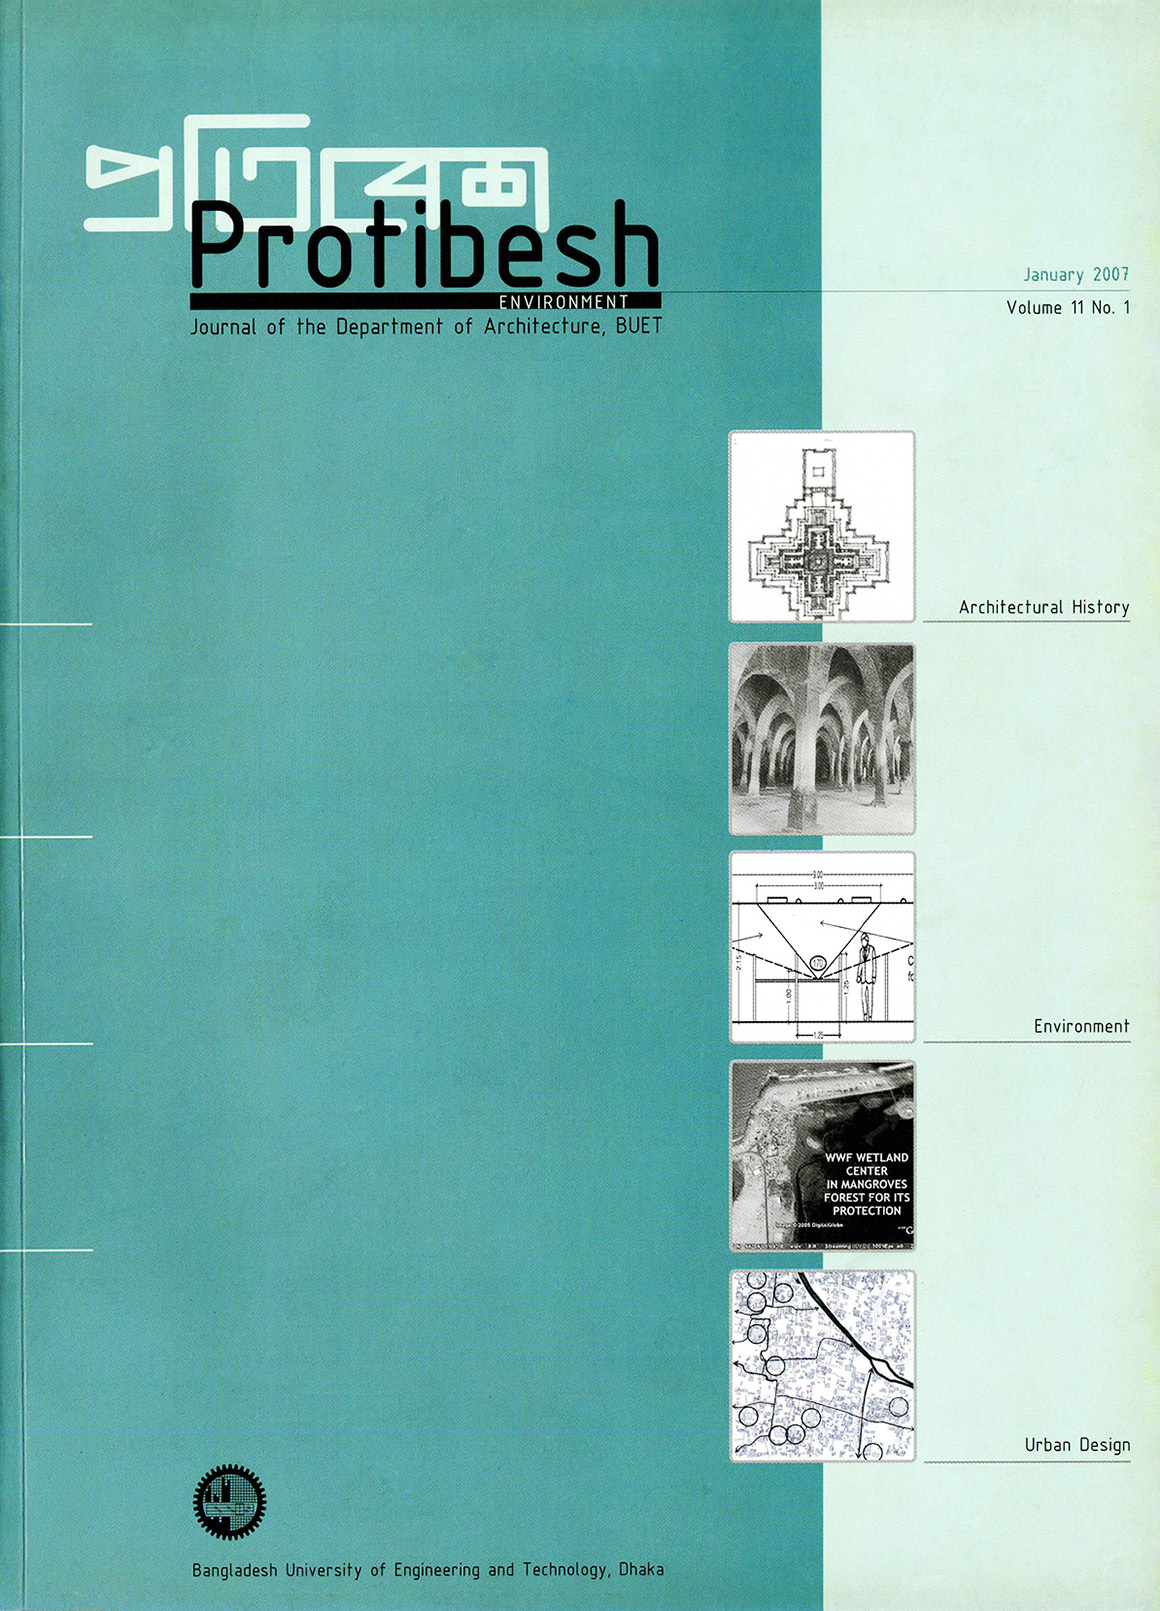 Cover image of Protibesh Vol-11 No-01 January 2007 - Journal of the Department of Architecture, BUET